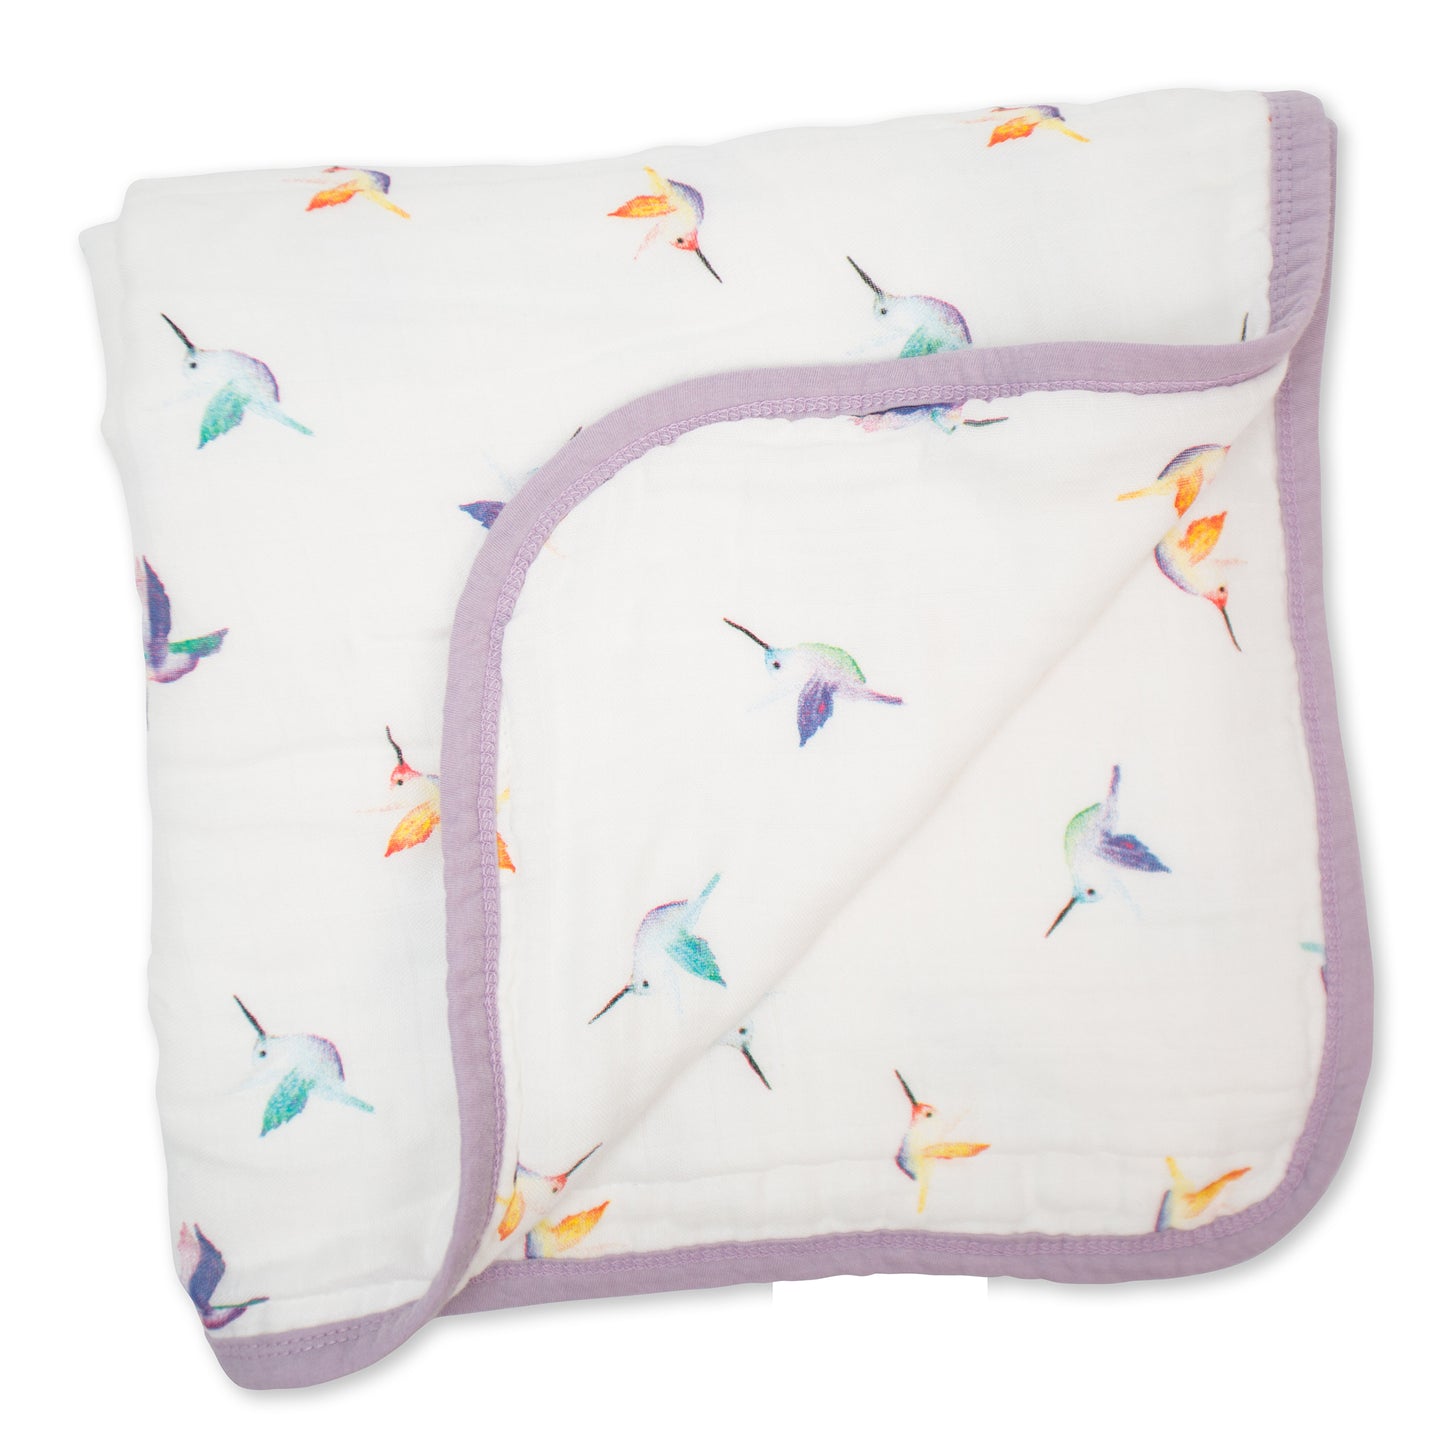 Baby's Hummingbird print Deluxe Muslin Quilt for crib, stroller, playpen and more